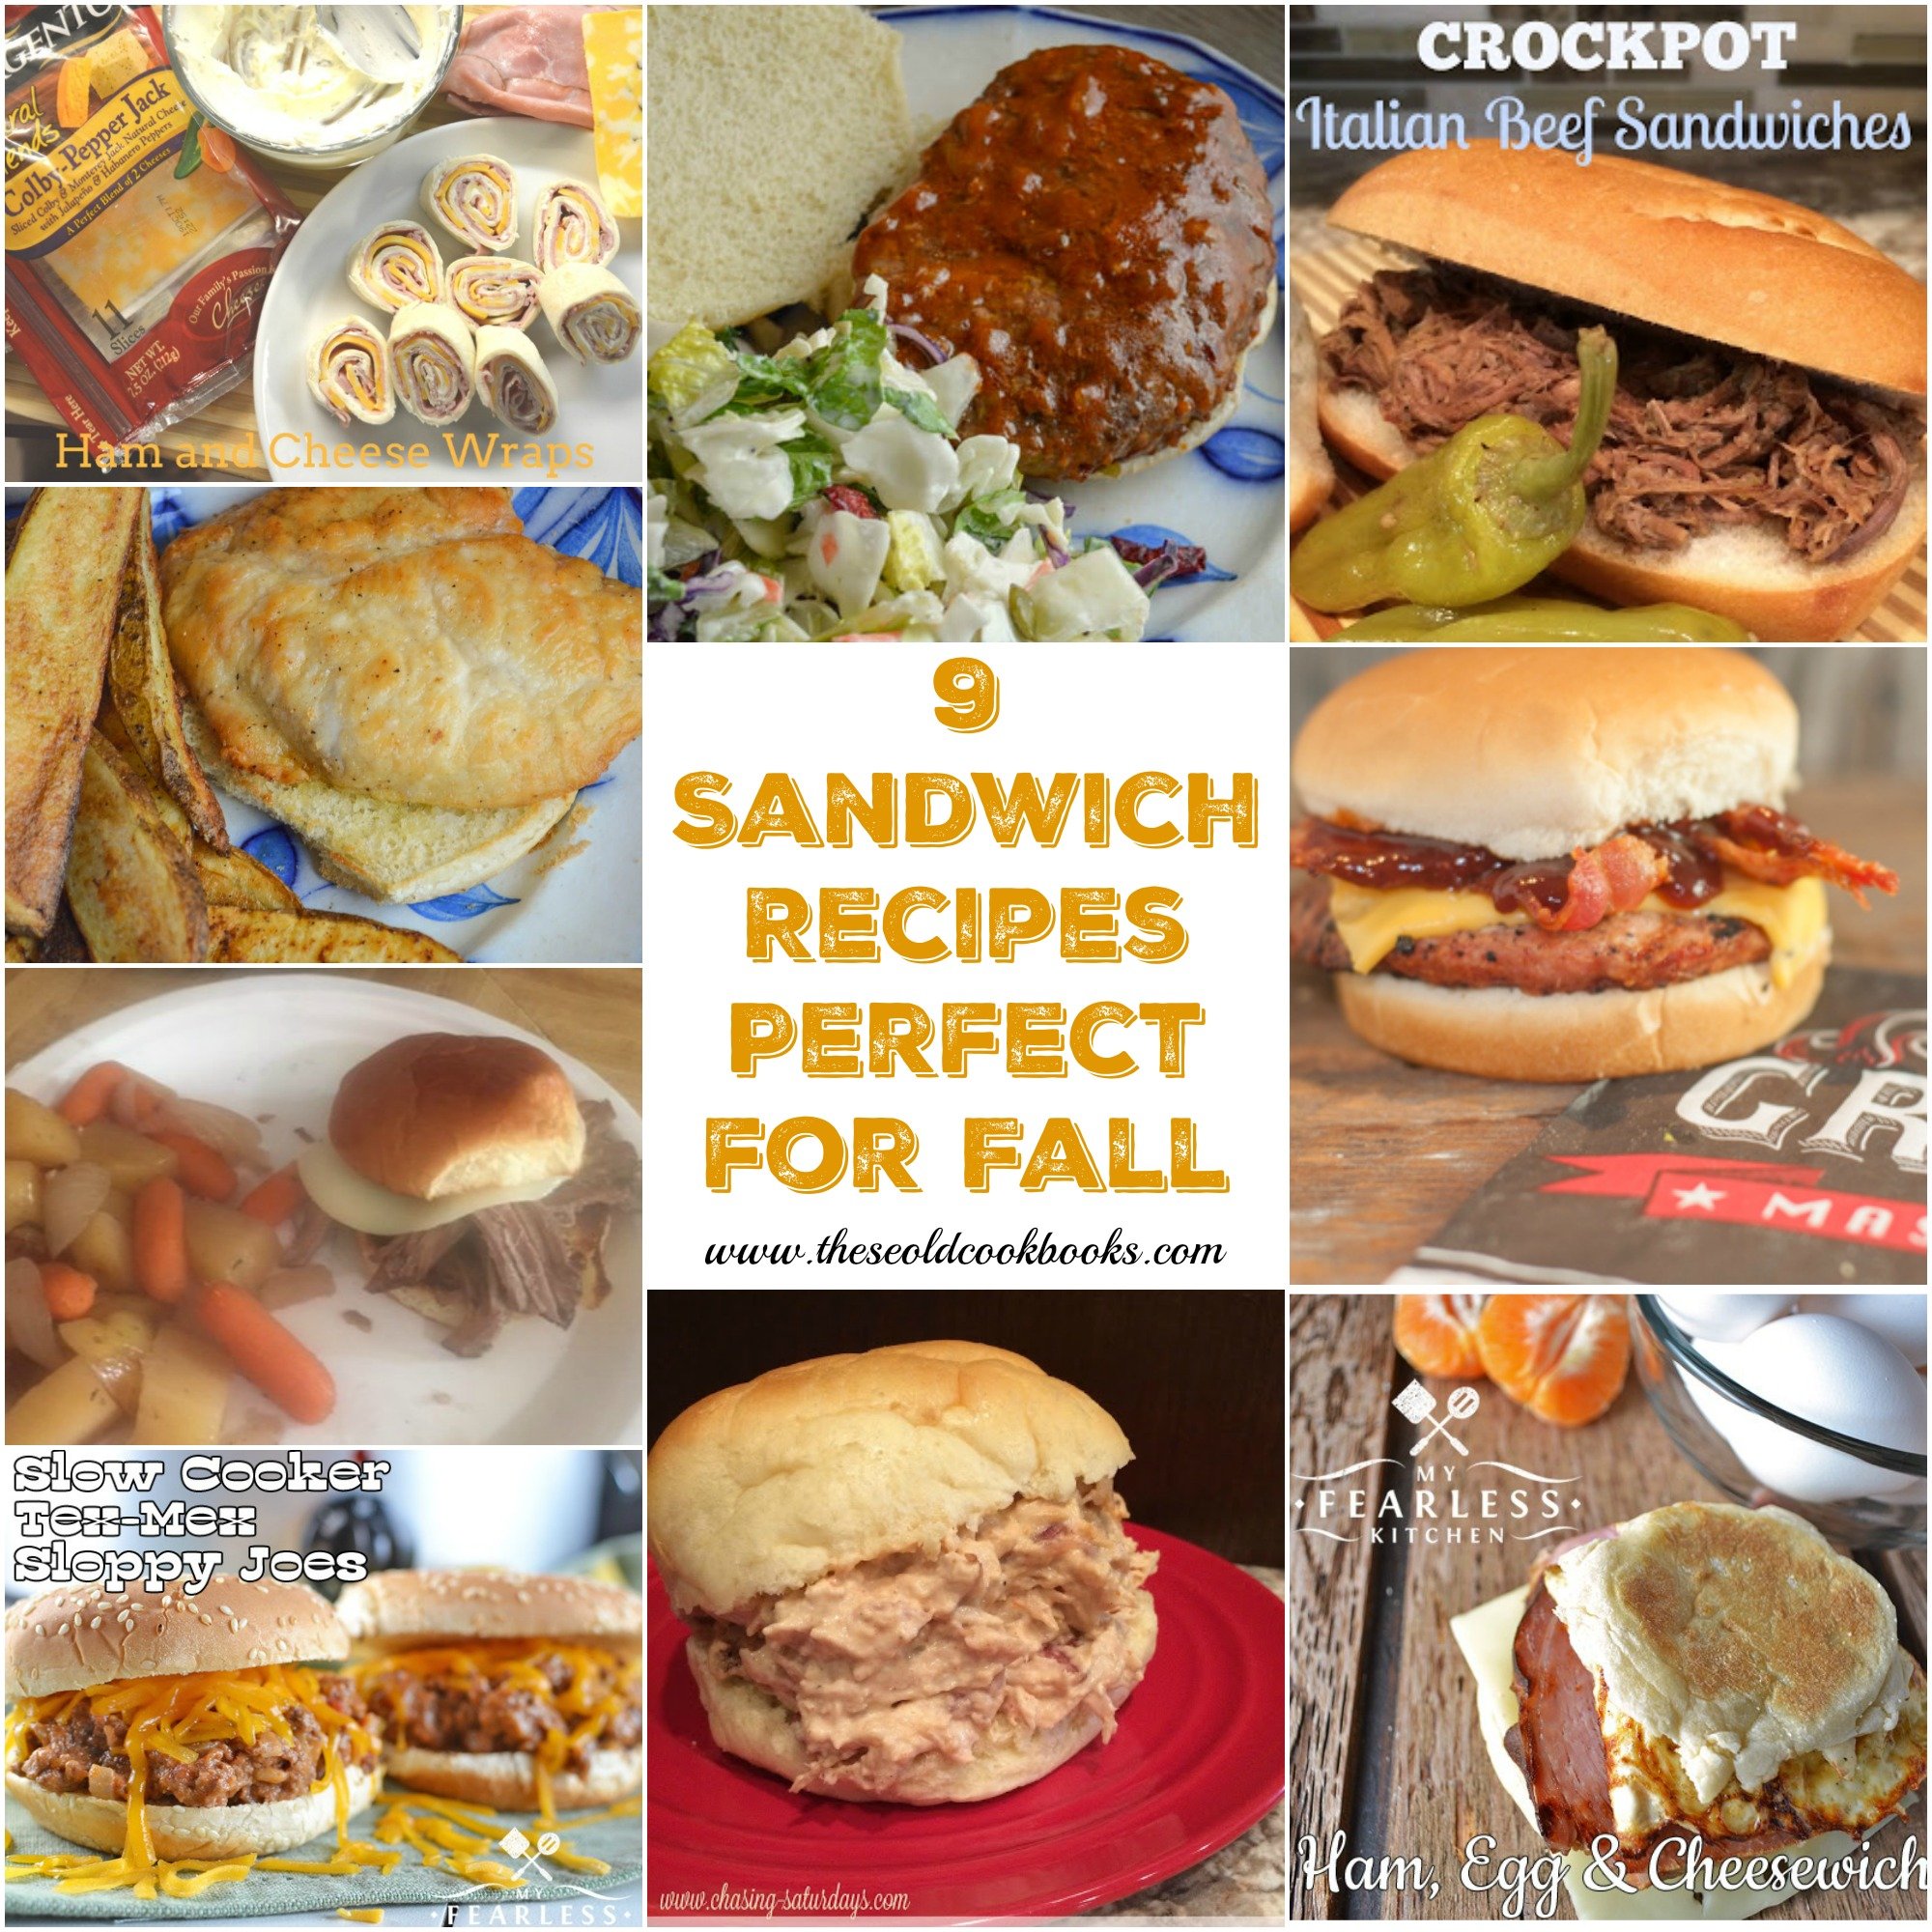 9 Sandwich Recipes Perfect for Fall